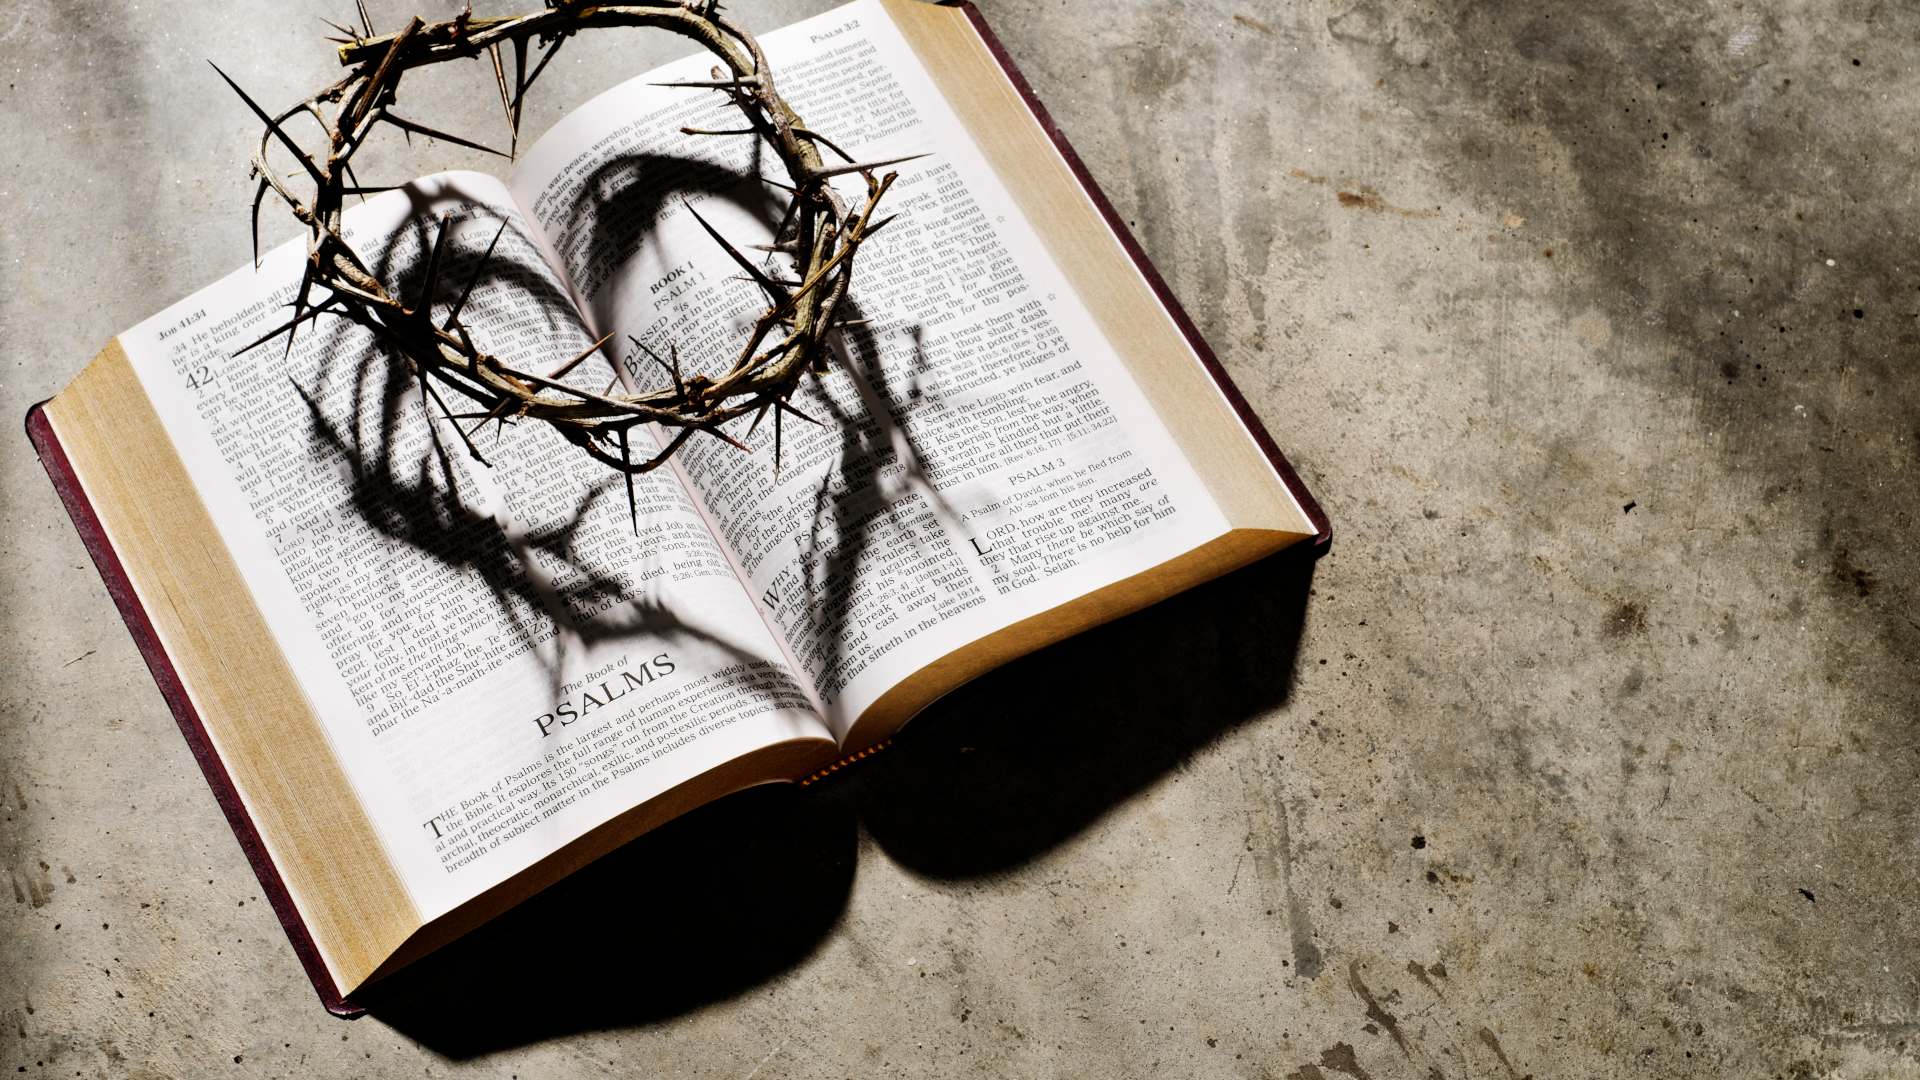 A crown of thorns resting on a Bible, whose shadow makes a heart shape